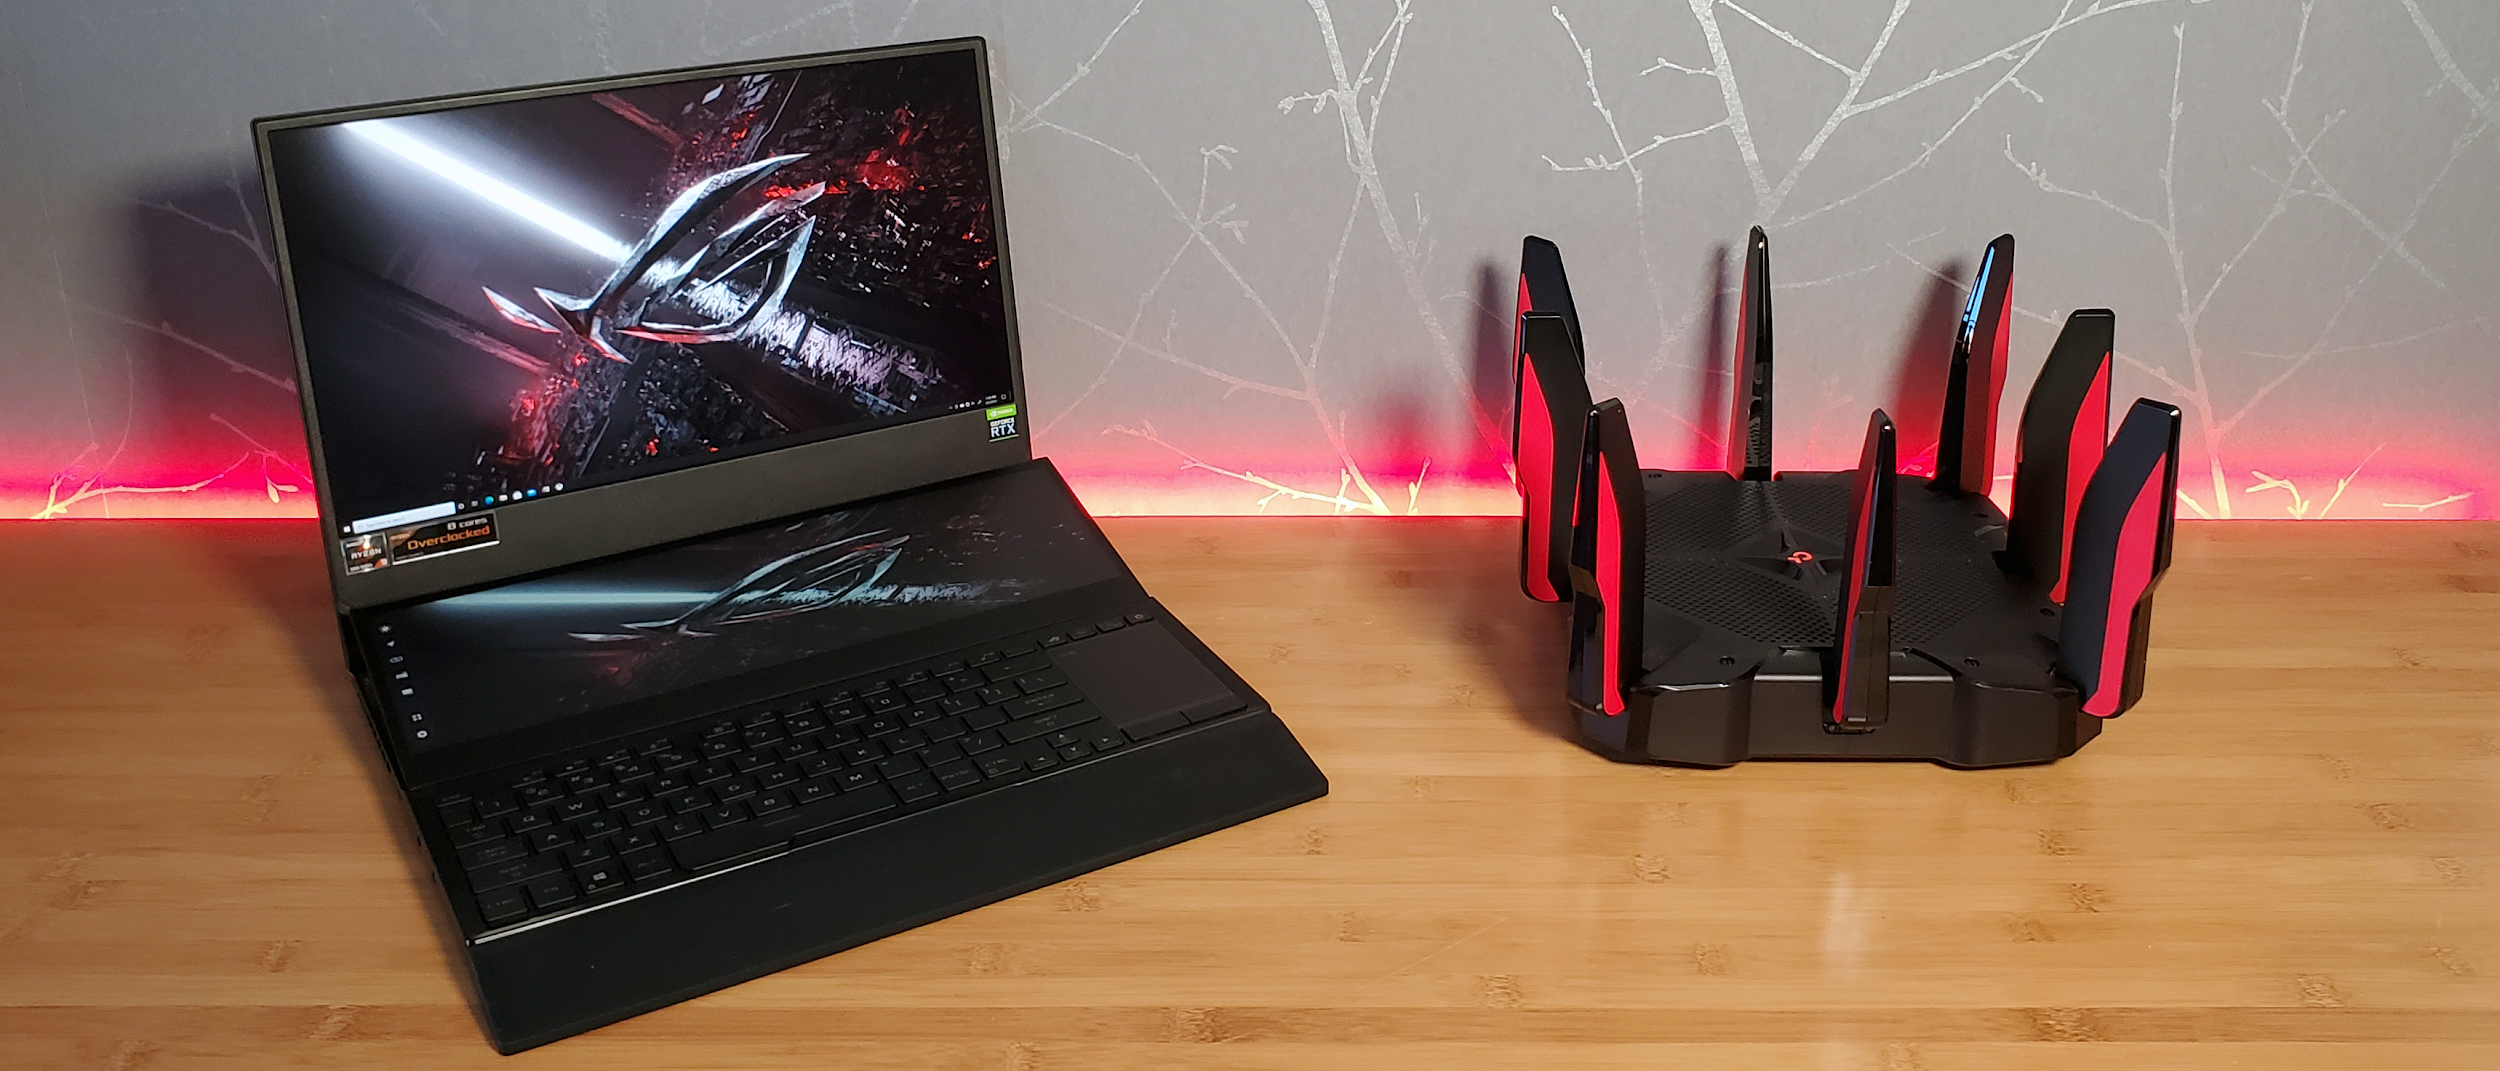 TP-Link Archer AX11000 Gaming Router Review: High-End Mixed Bag 